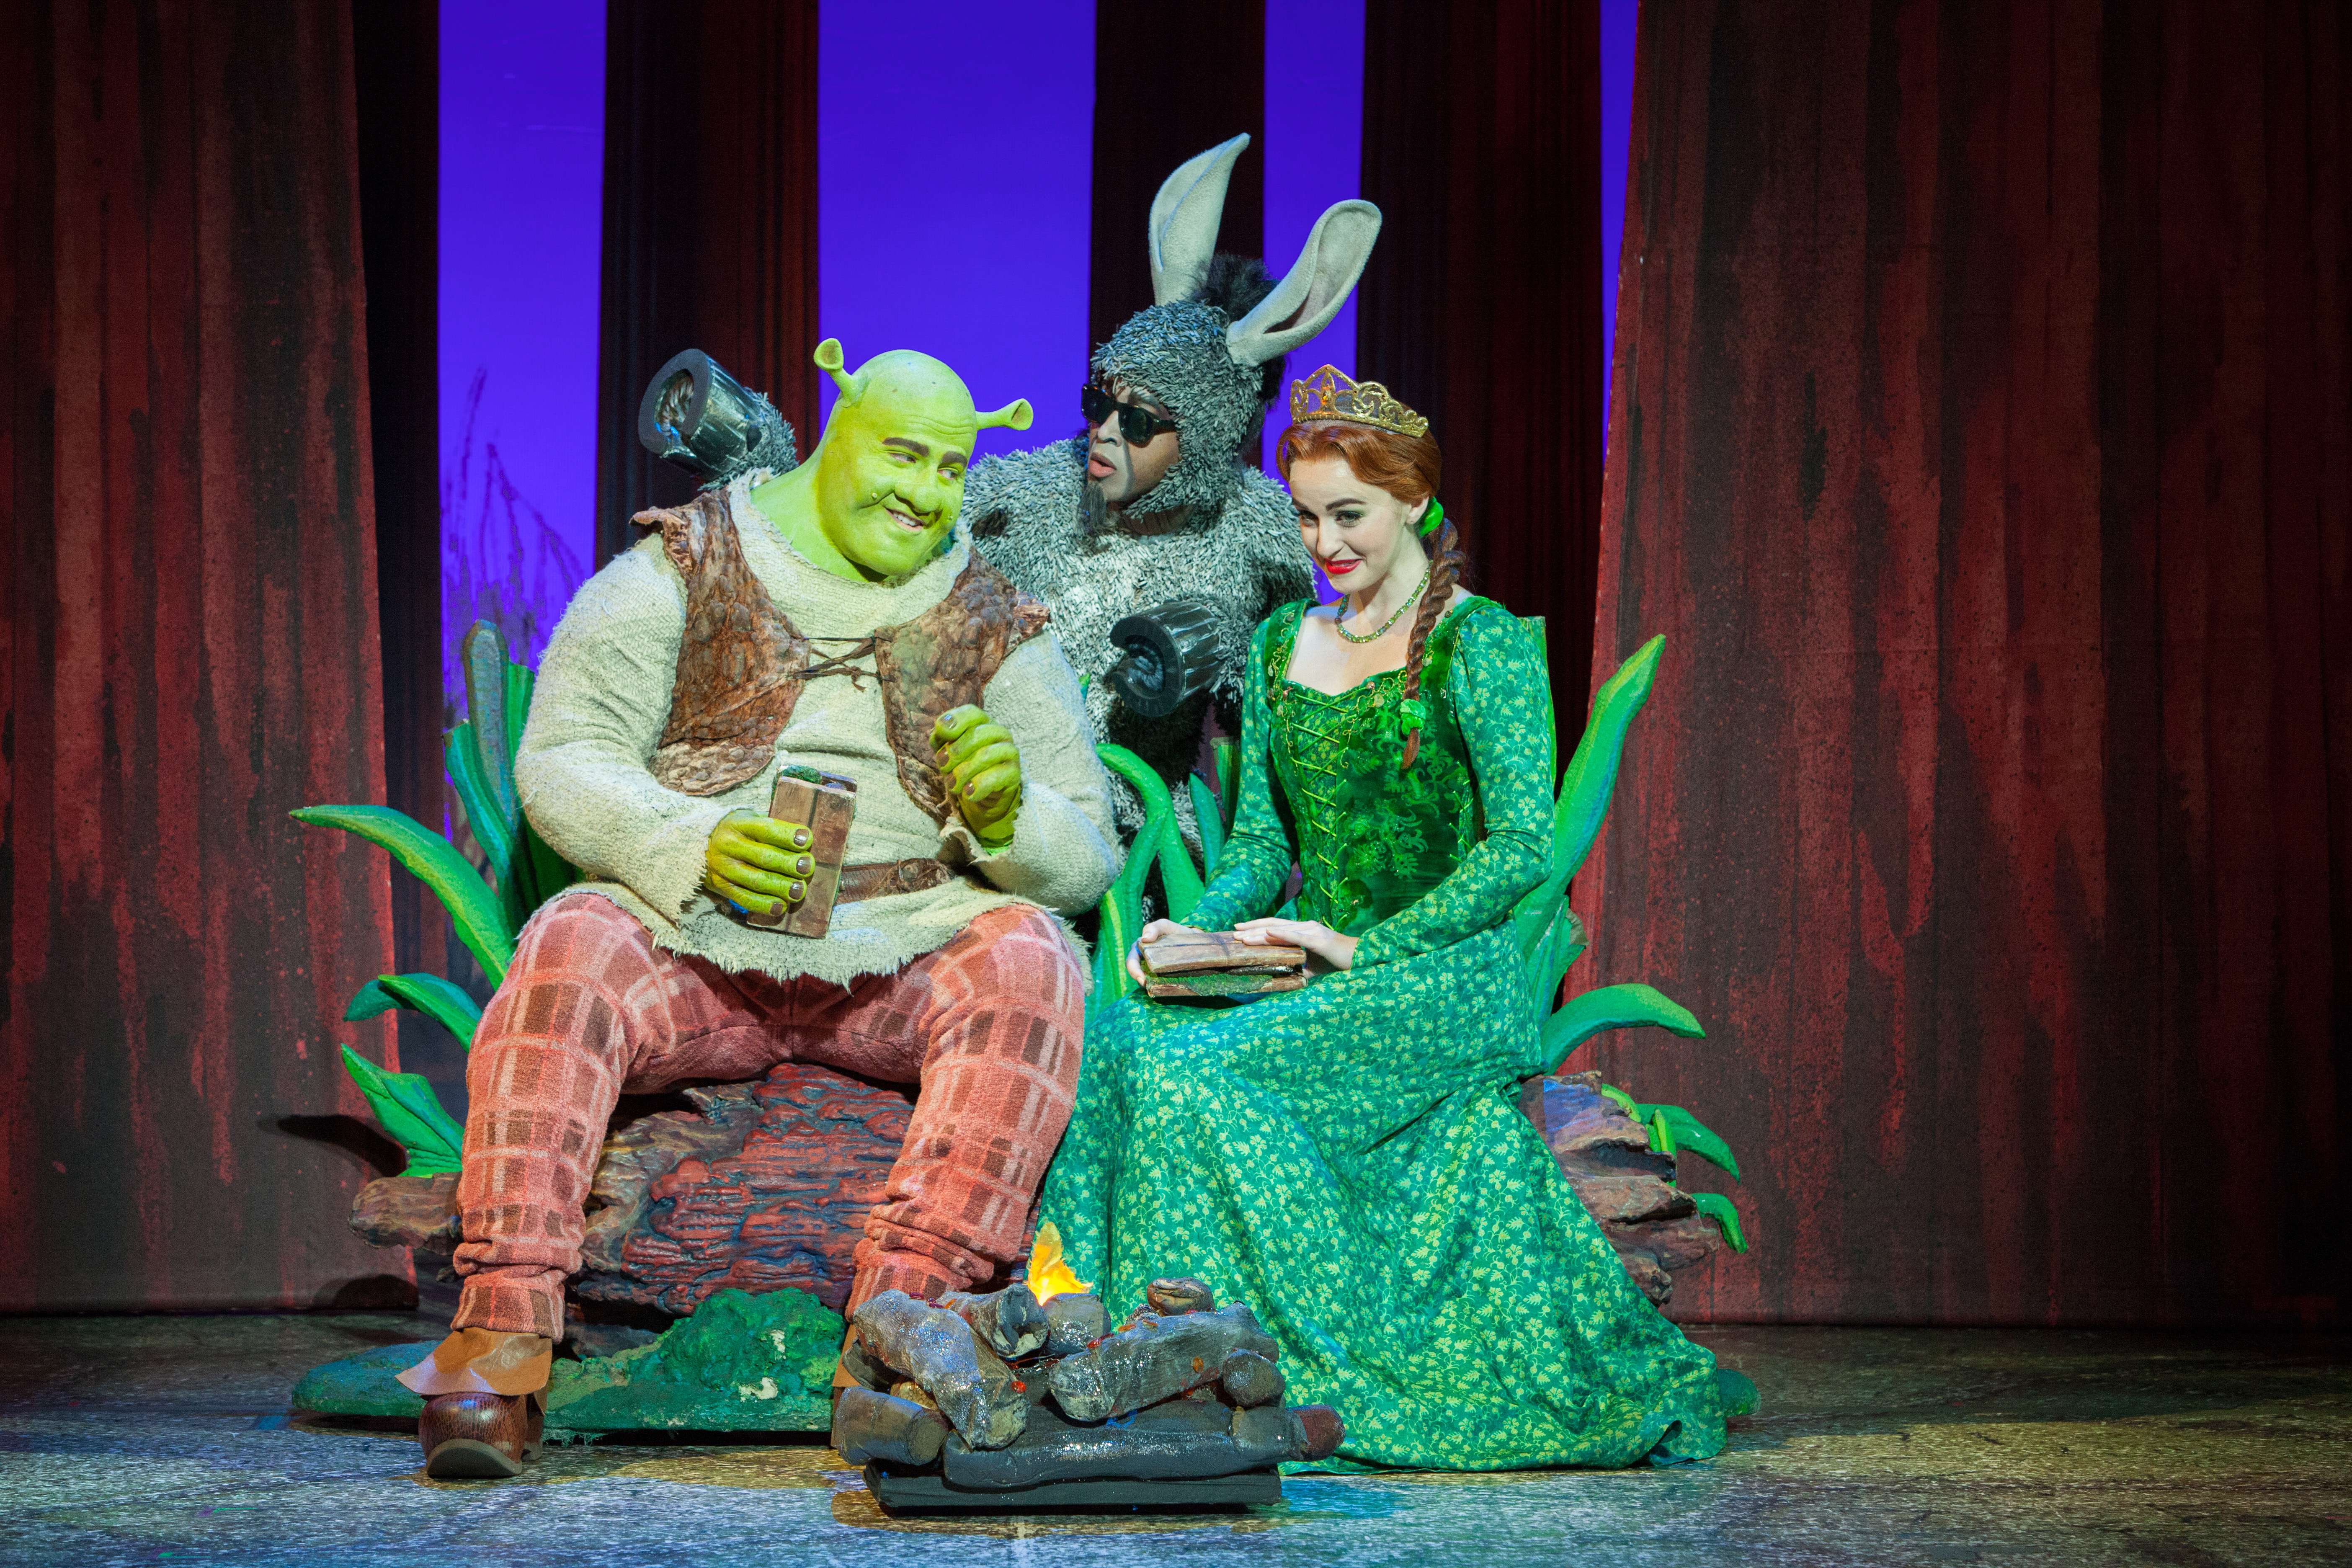 A scene from Shrek the Musical, on at The Venetian Macao. Photo: Paparazzi by Appointment